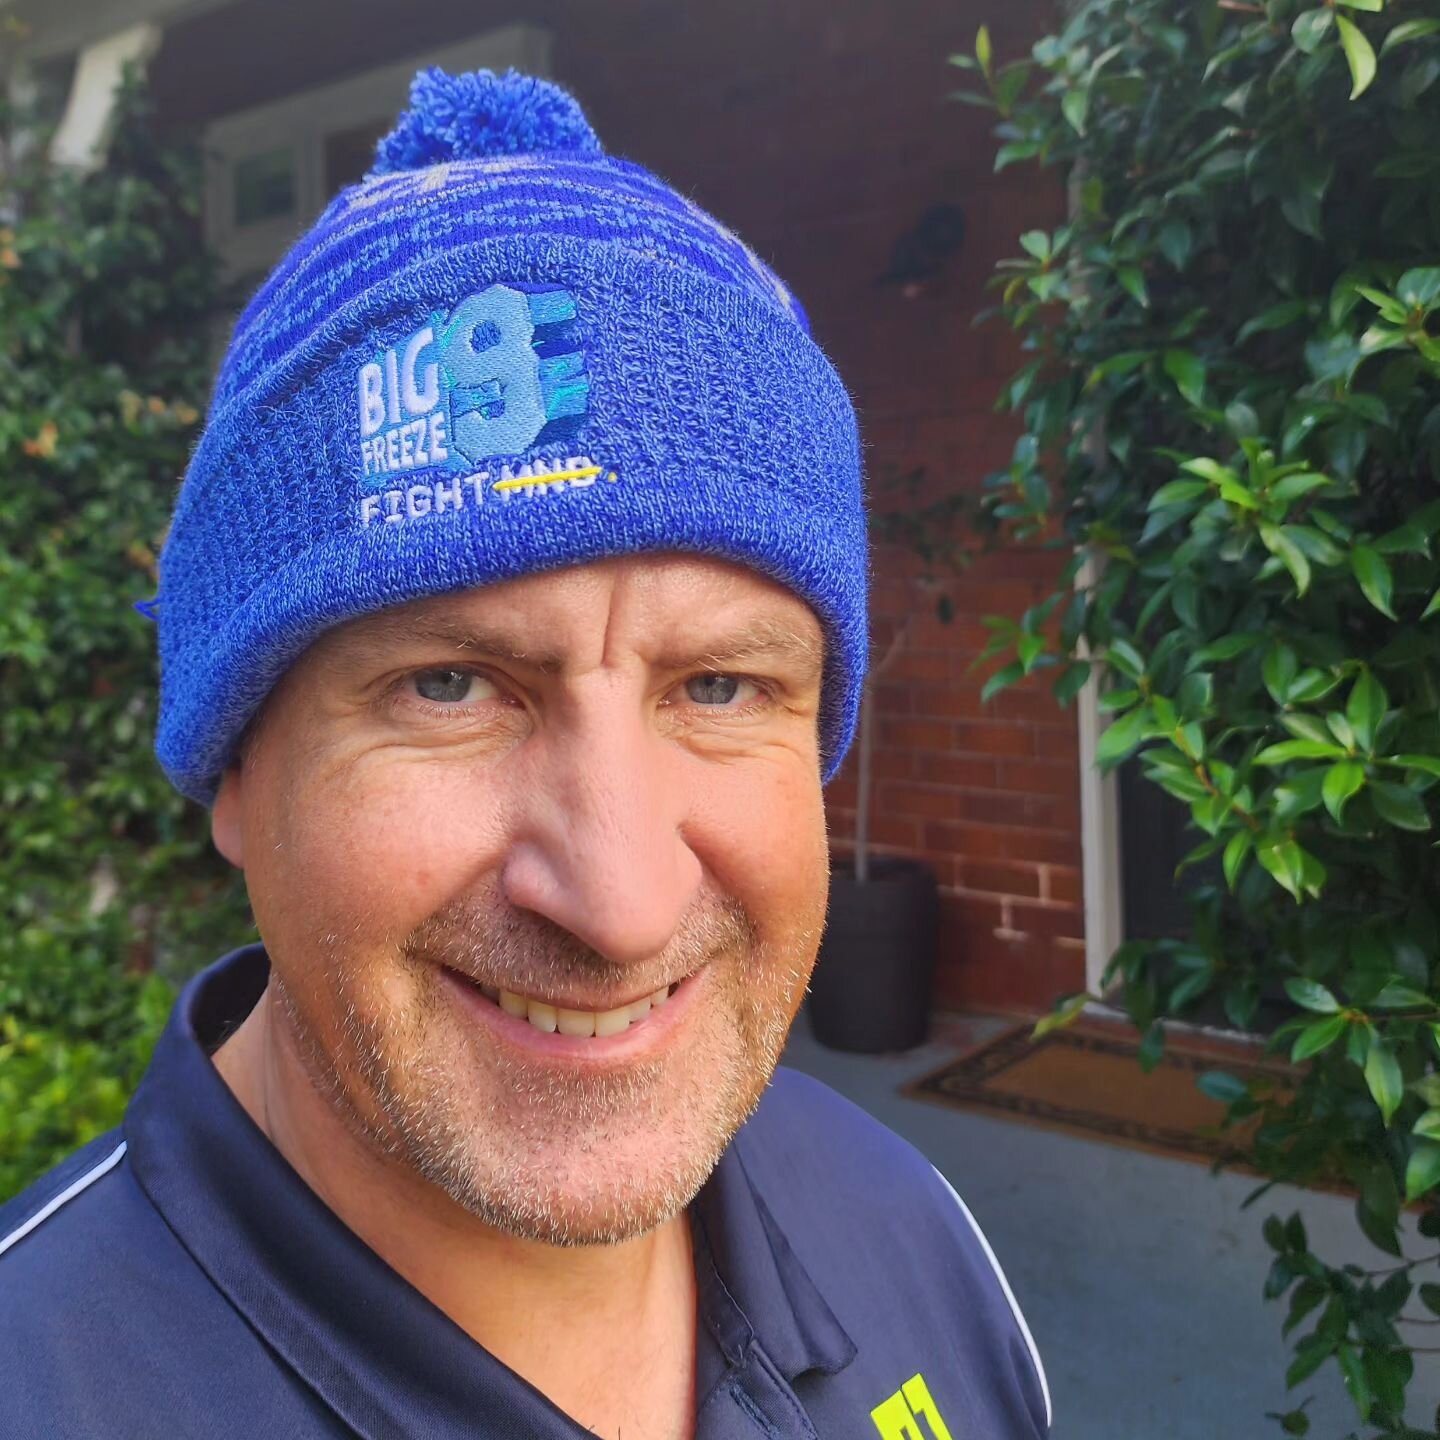 It's back #bigfreeze9. Just picked up my #bigfreezebeanie9 from @colessupermarkets . Let's beat the beast that is #mnd #ALS